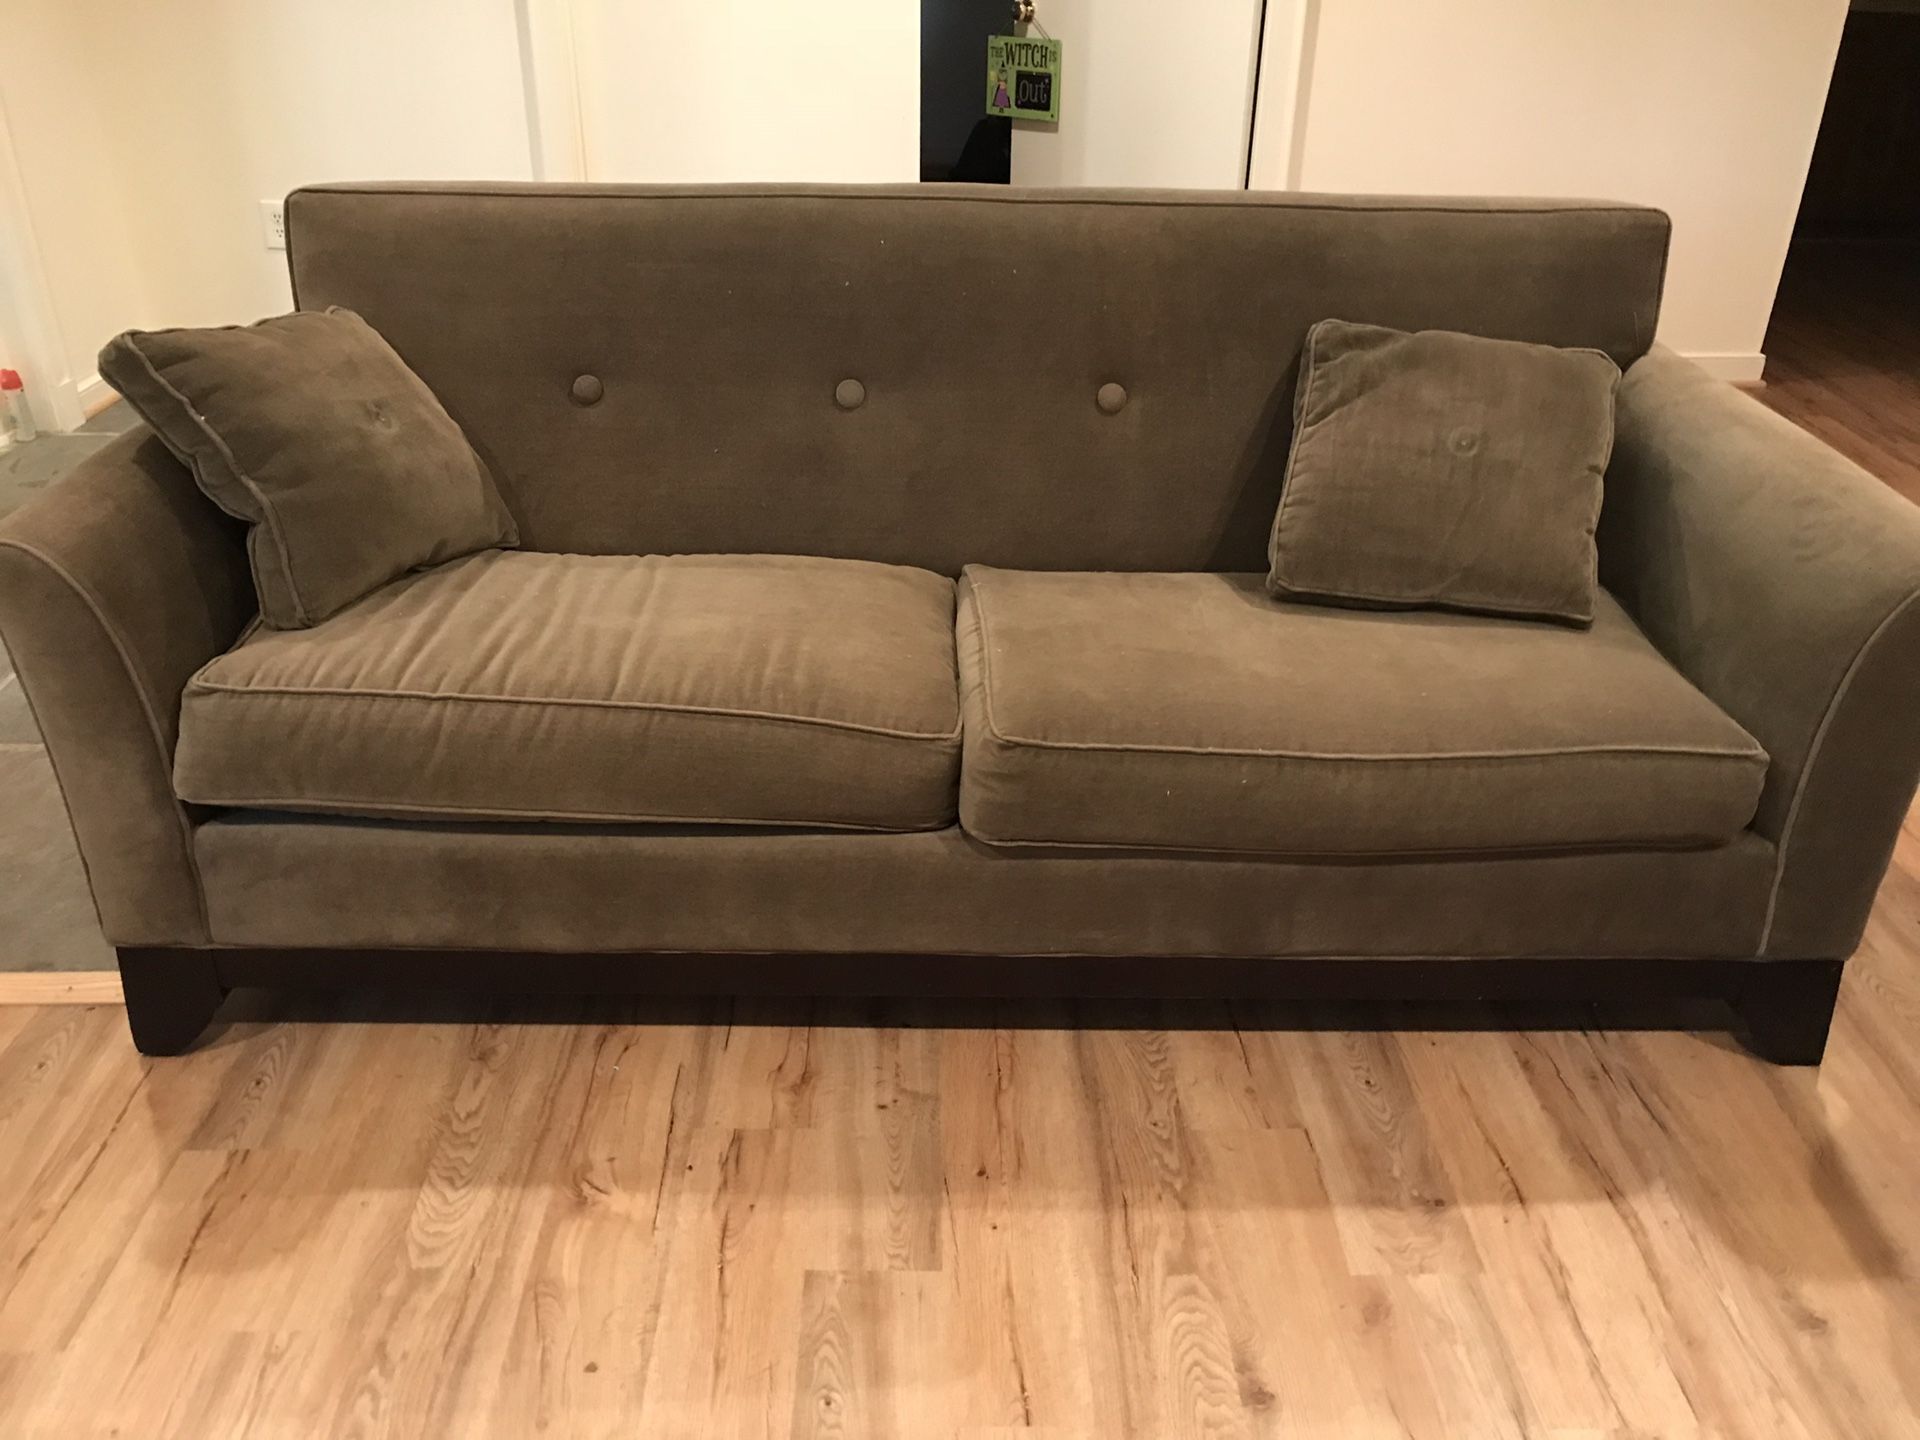 Olive green couch